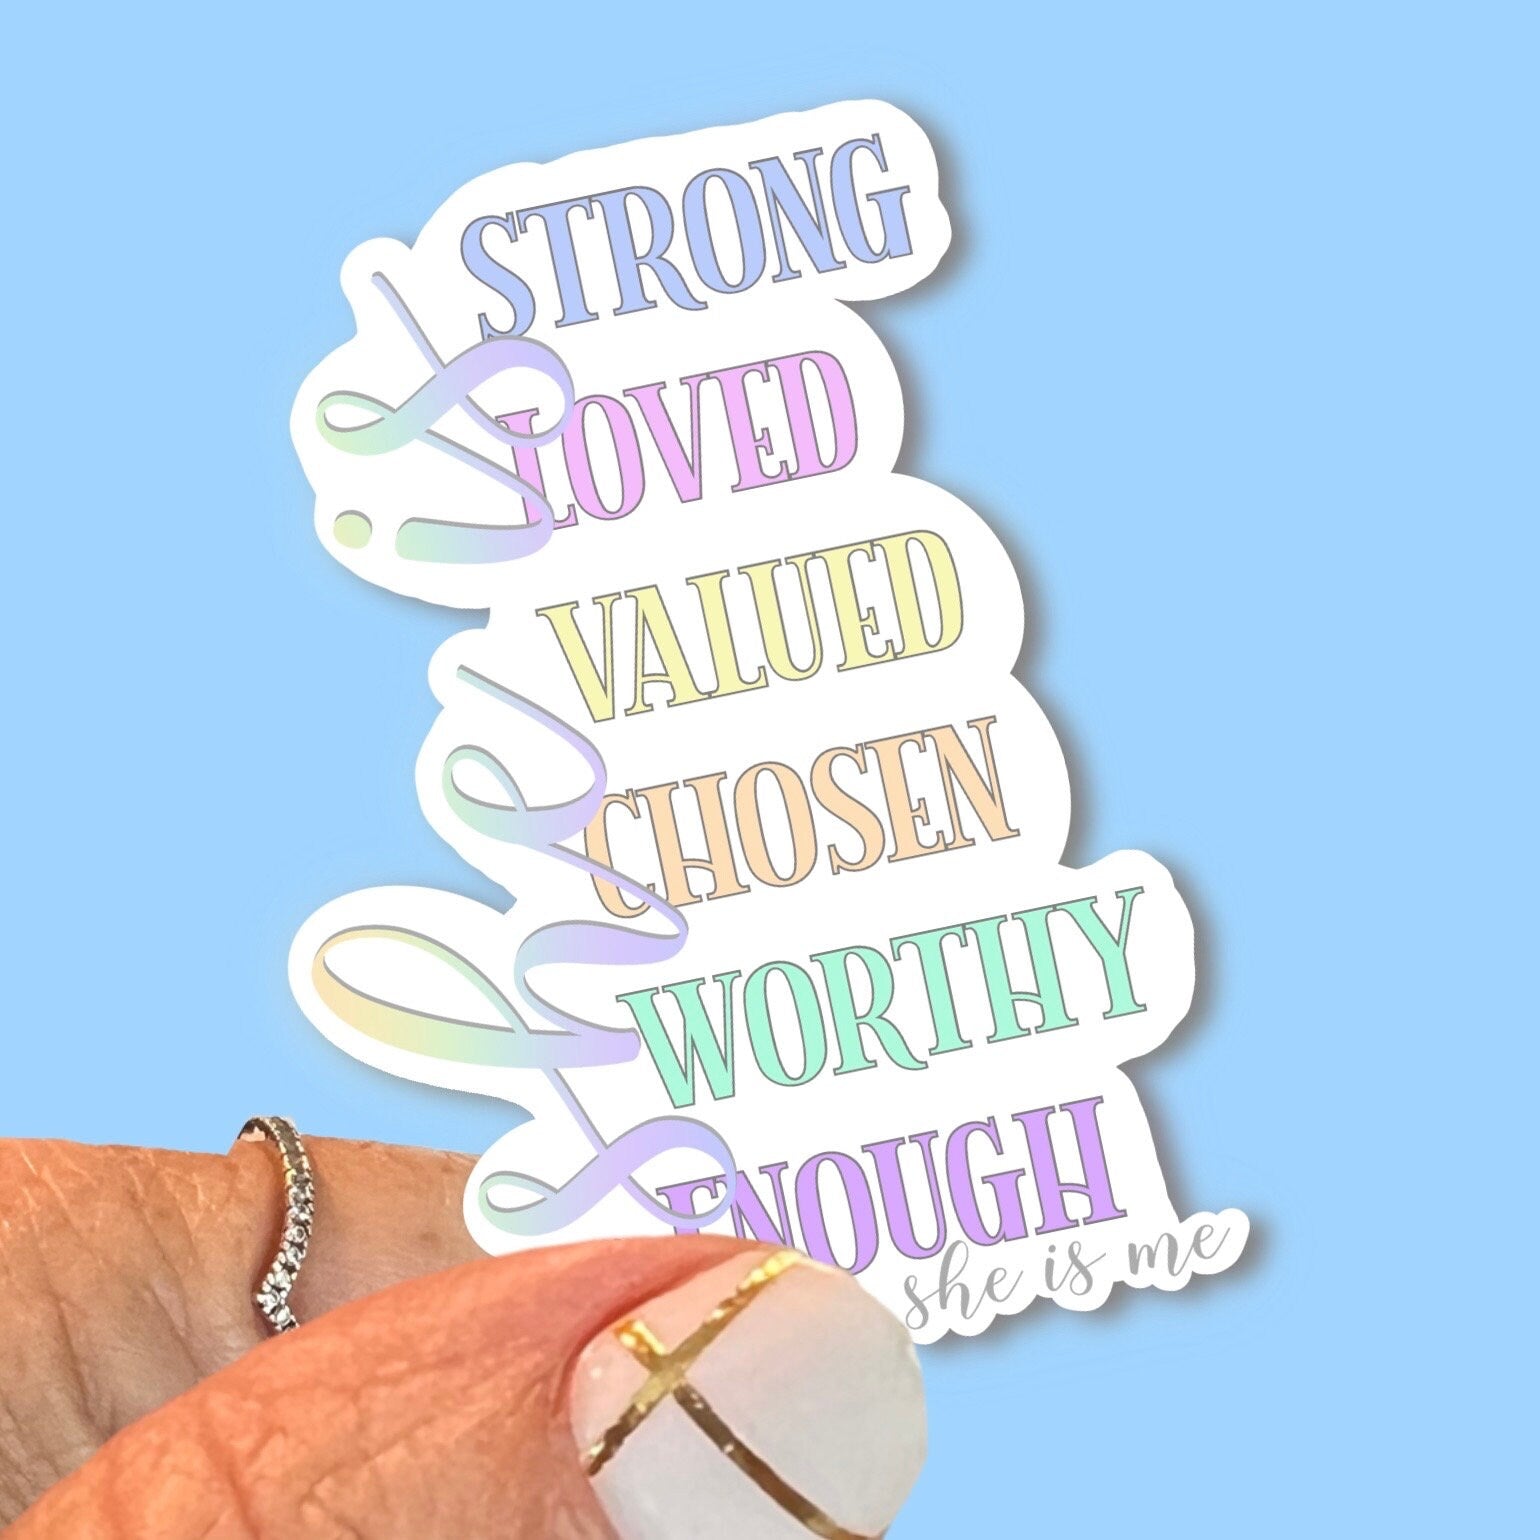 She is Strong, Loved, Valued, Chosen, Worthy, Enough; She is Me - Christian Faith UV/ Waterproof Vinyl Sticker/ Decal- Choice of Size